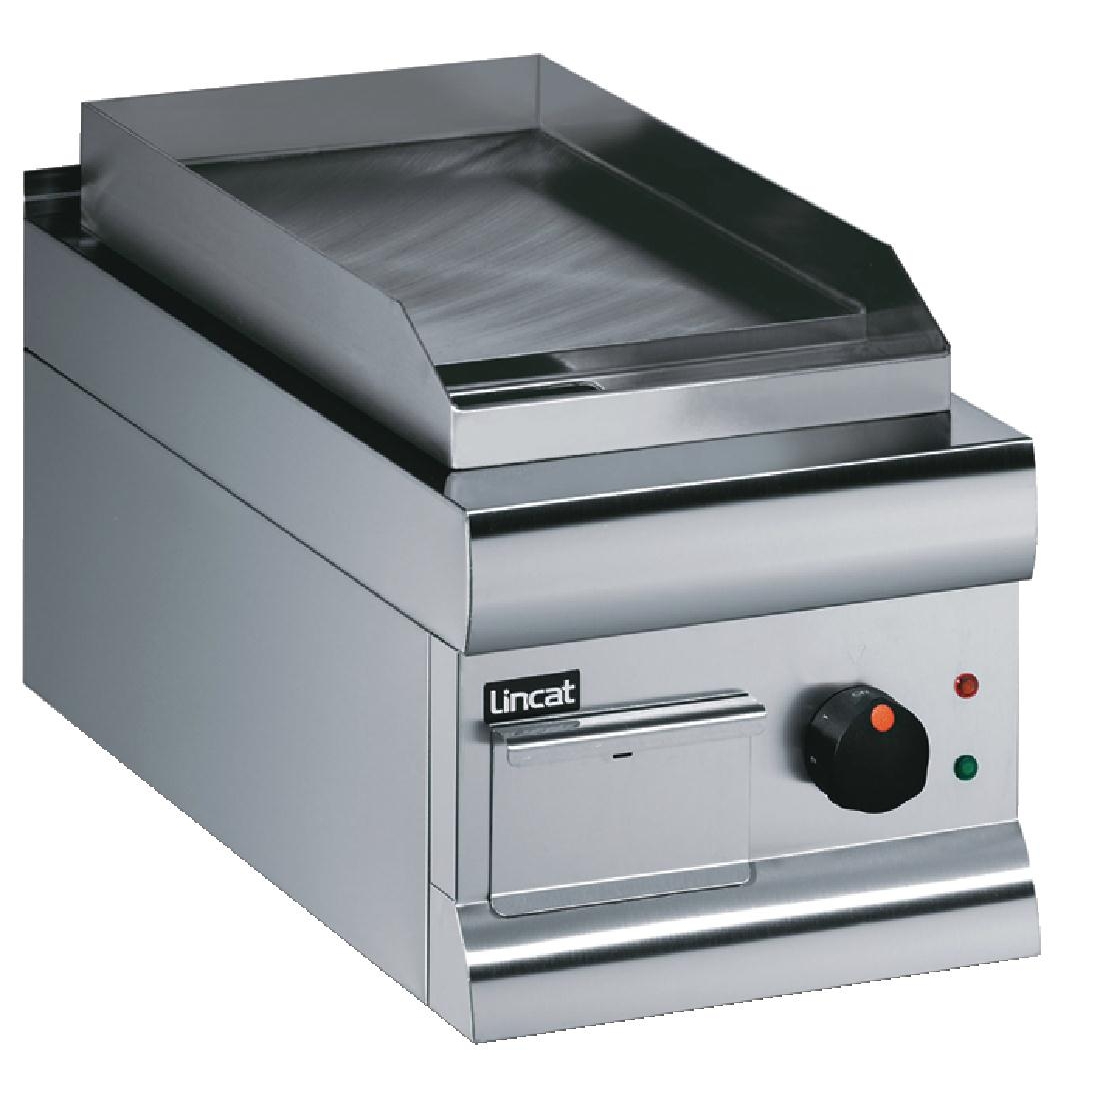 Lincat Silverlink 600 Machined Steel Electric Griddle GS3